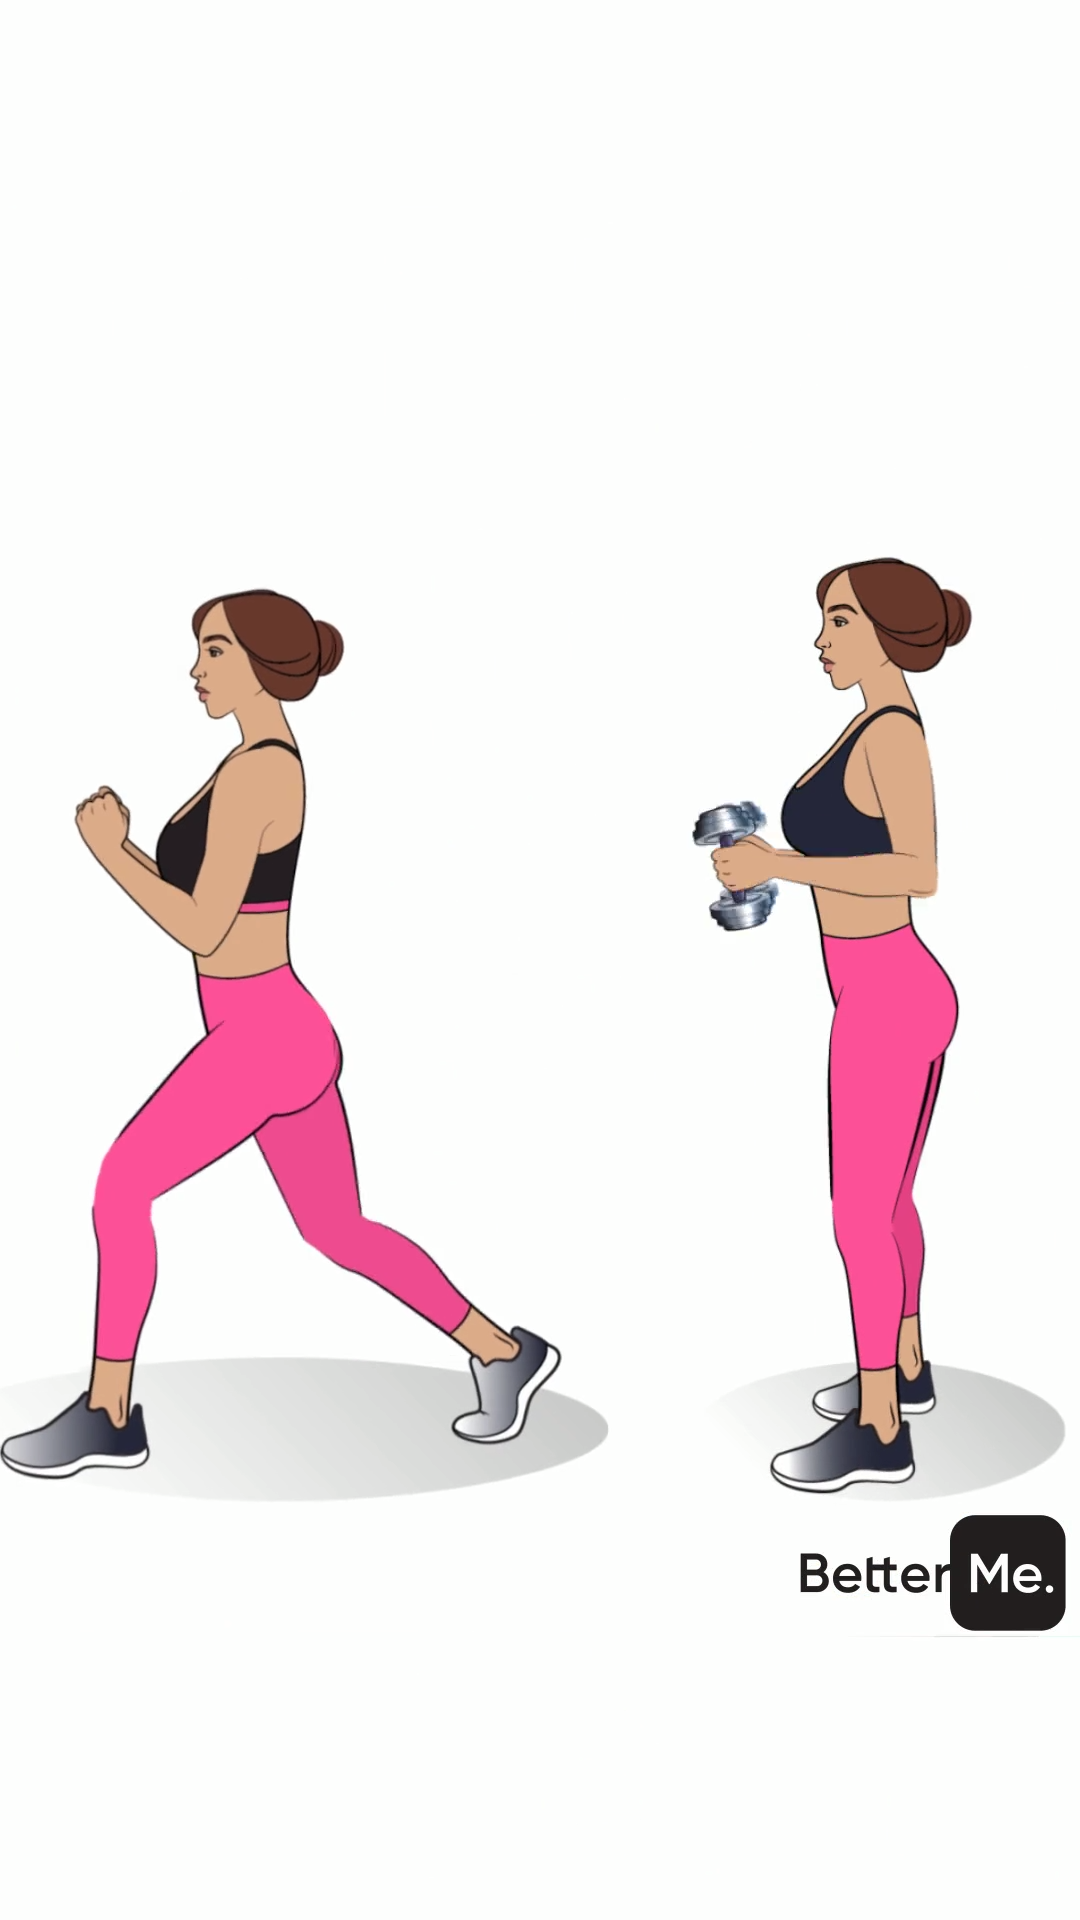 Have Slimmer Body with 28-Day Challenge - Have Slimmer Body with 28-Day Challenge -   15 fitness Illustration woman ideas